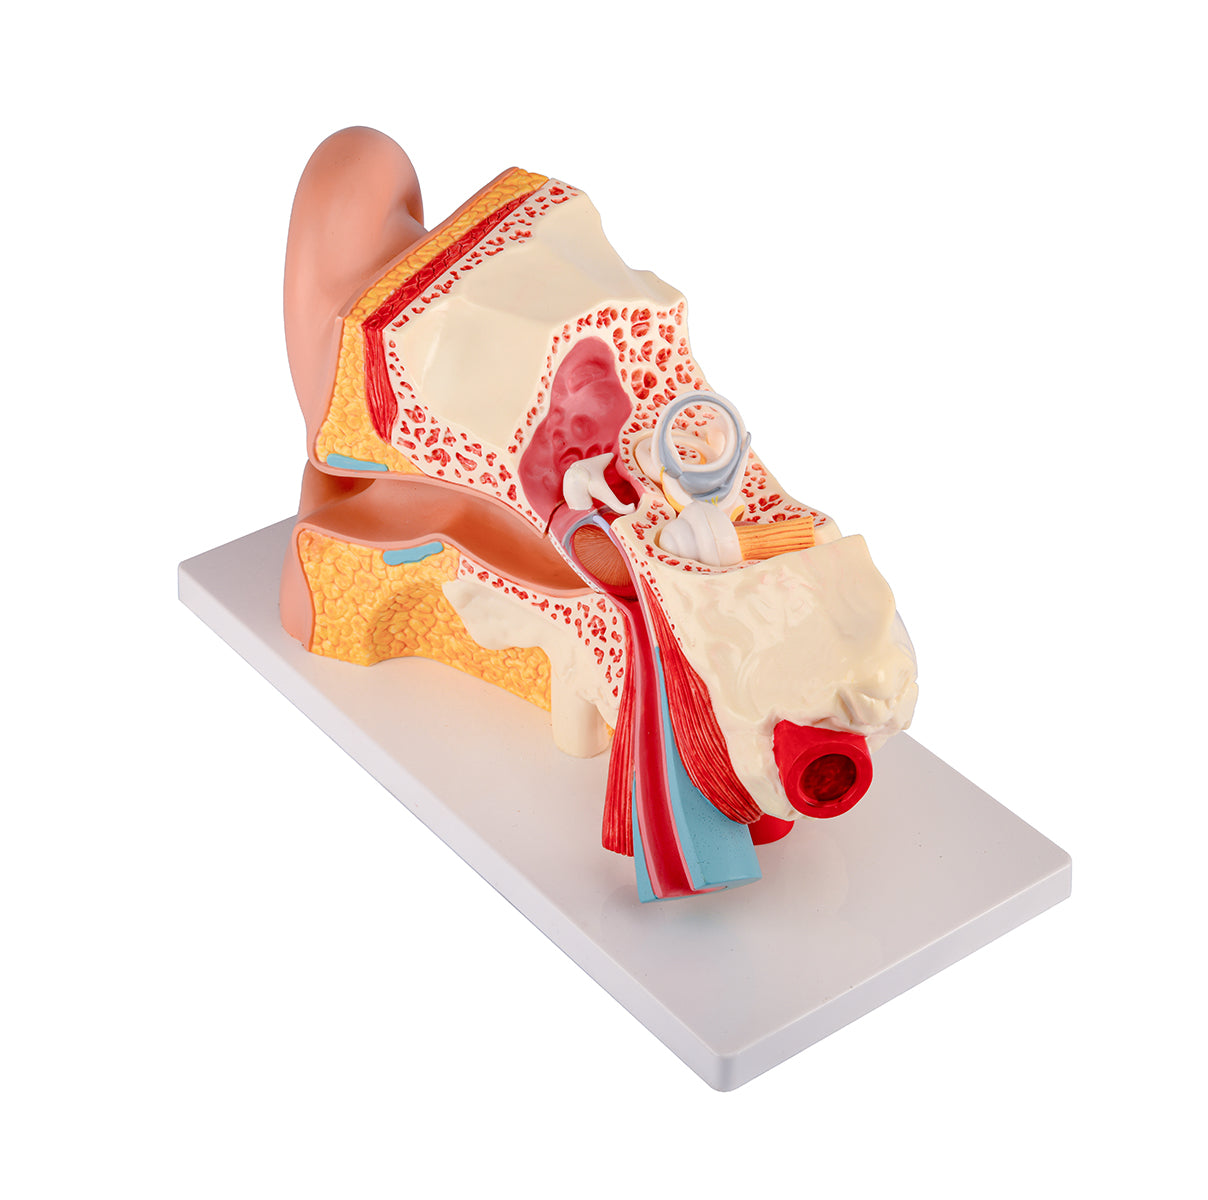 Evotech Scientific 3 Times Enlarged Human Ear Model with 3 Parts Showing Major Regions of The Ear